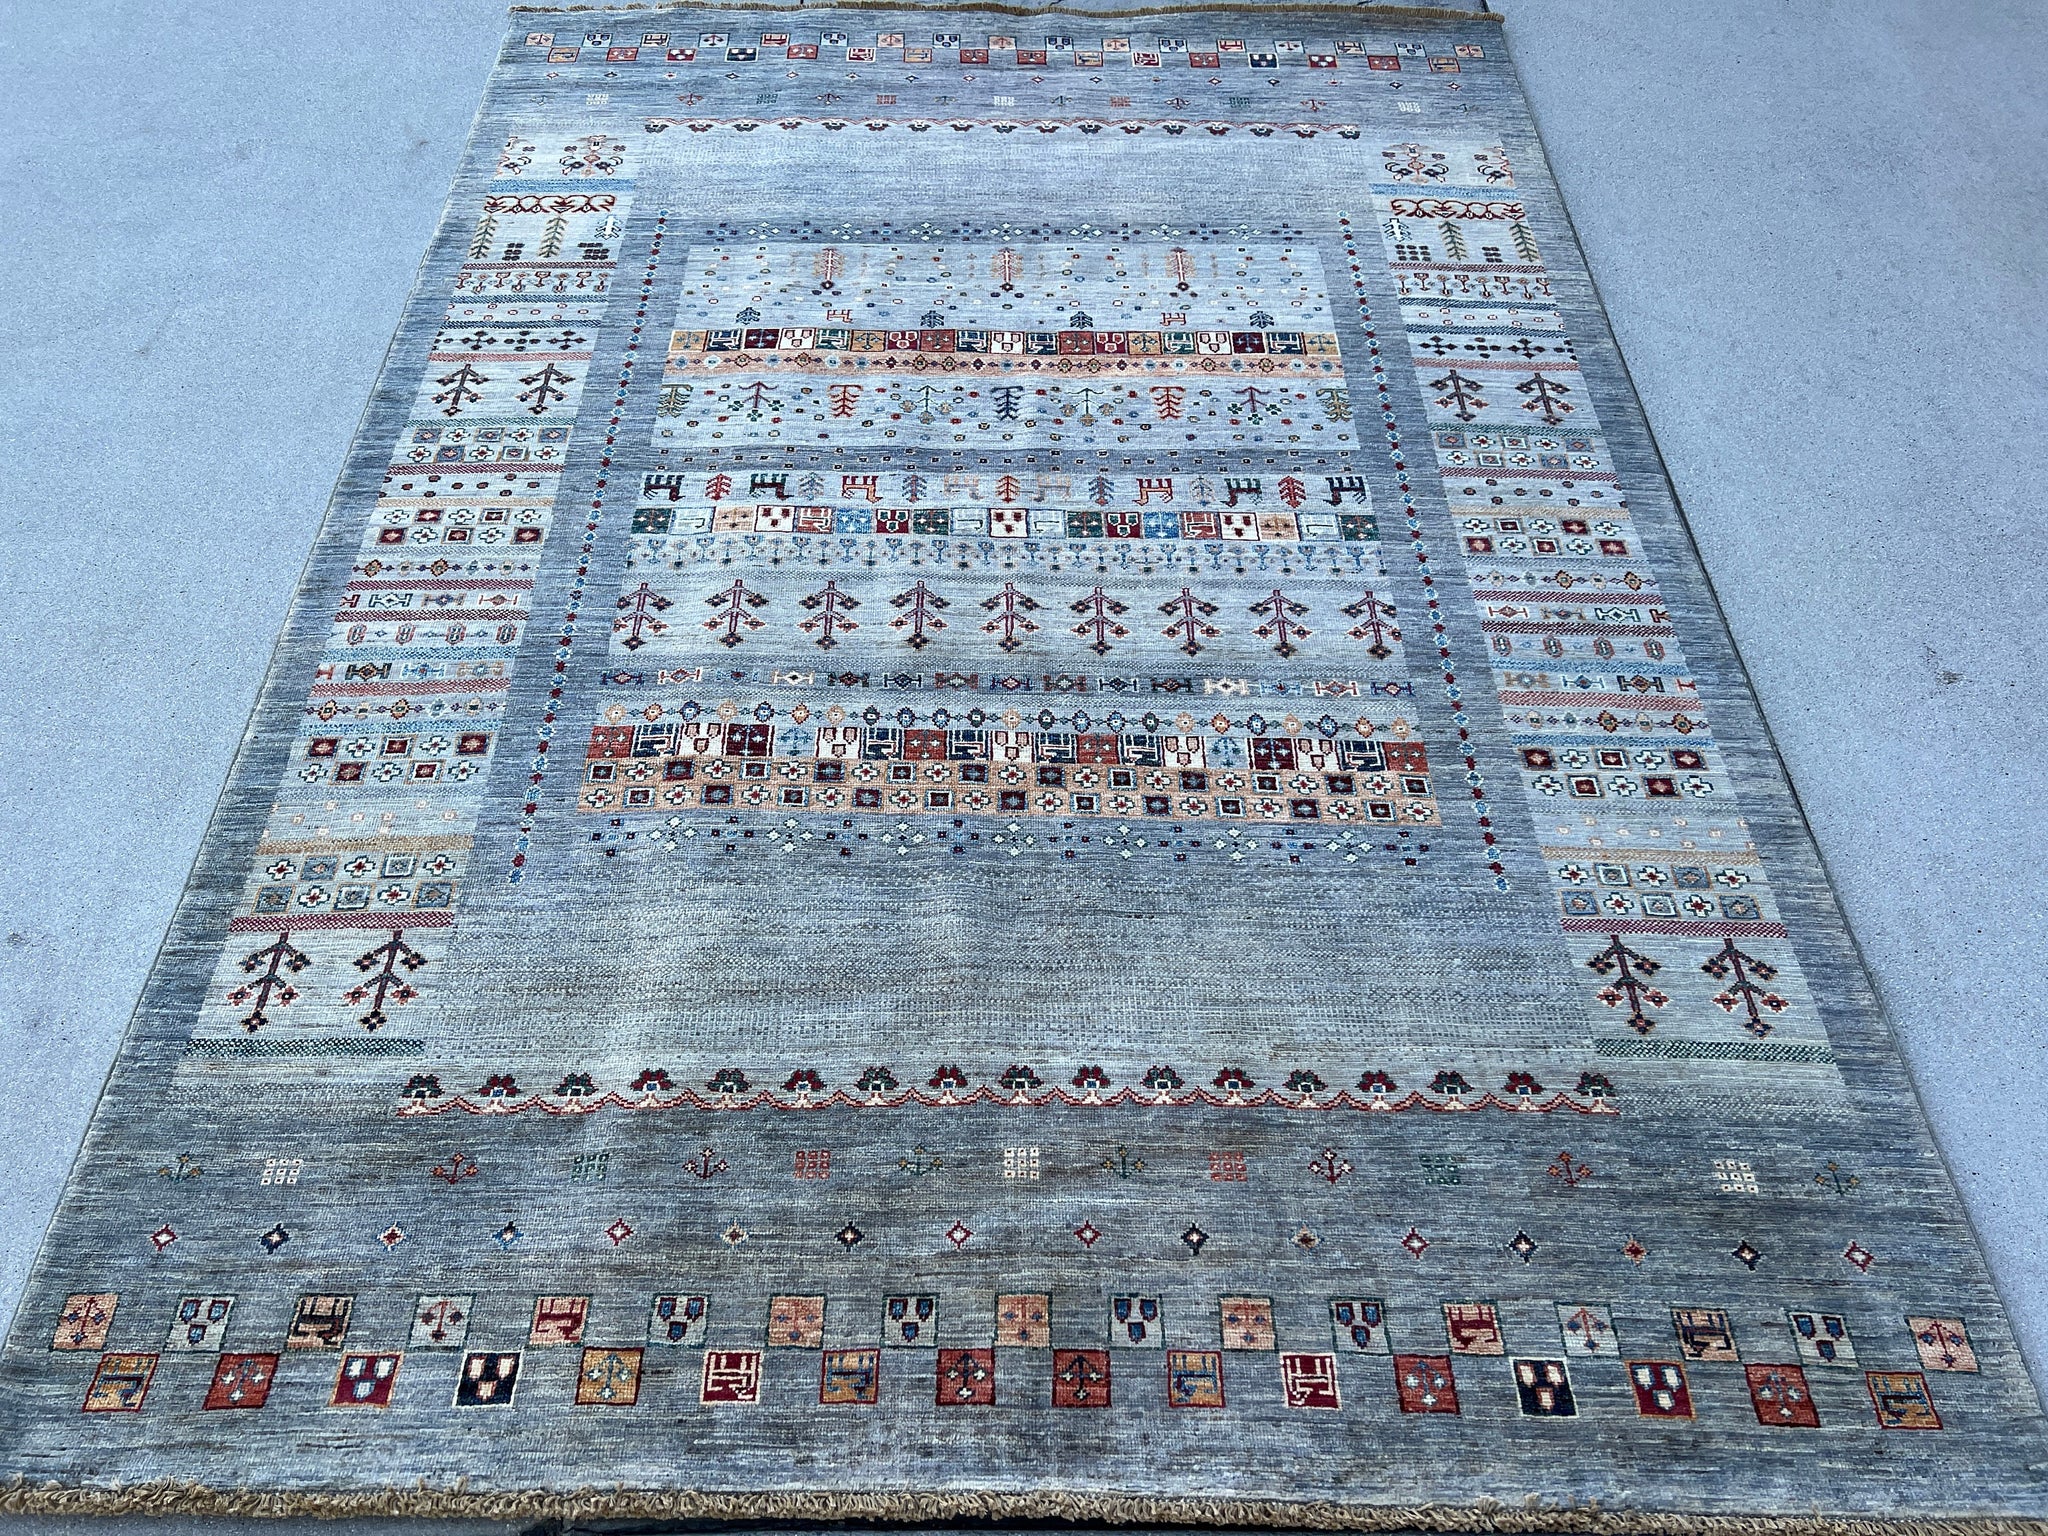 6x8 (180x245) Hand Knotted Afghan Rug | Grey Charcoal Burnt Orange Maroon Yellow Denim Blue Coral Green Navy Cream Beige | Floral Wool